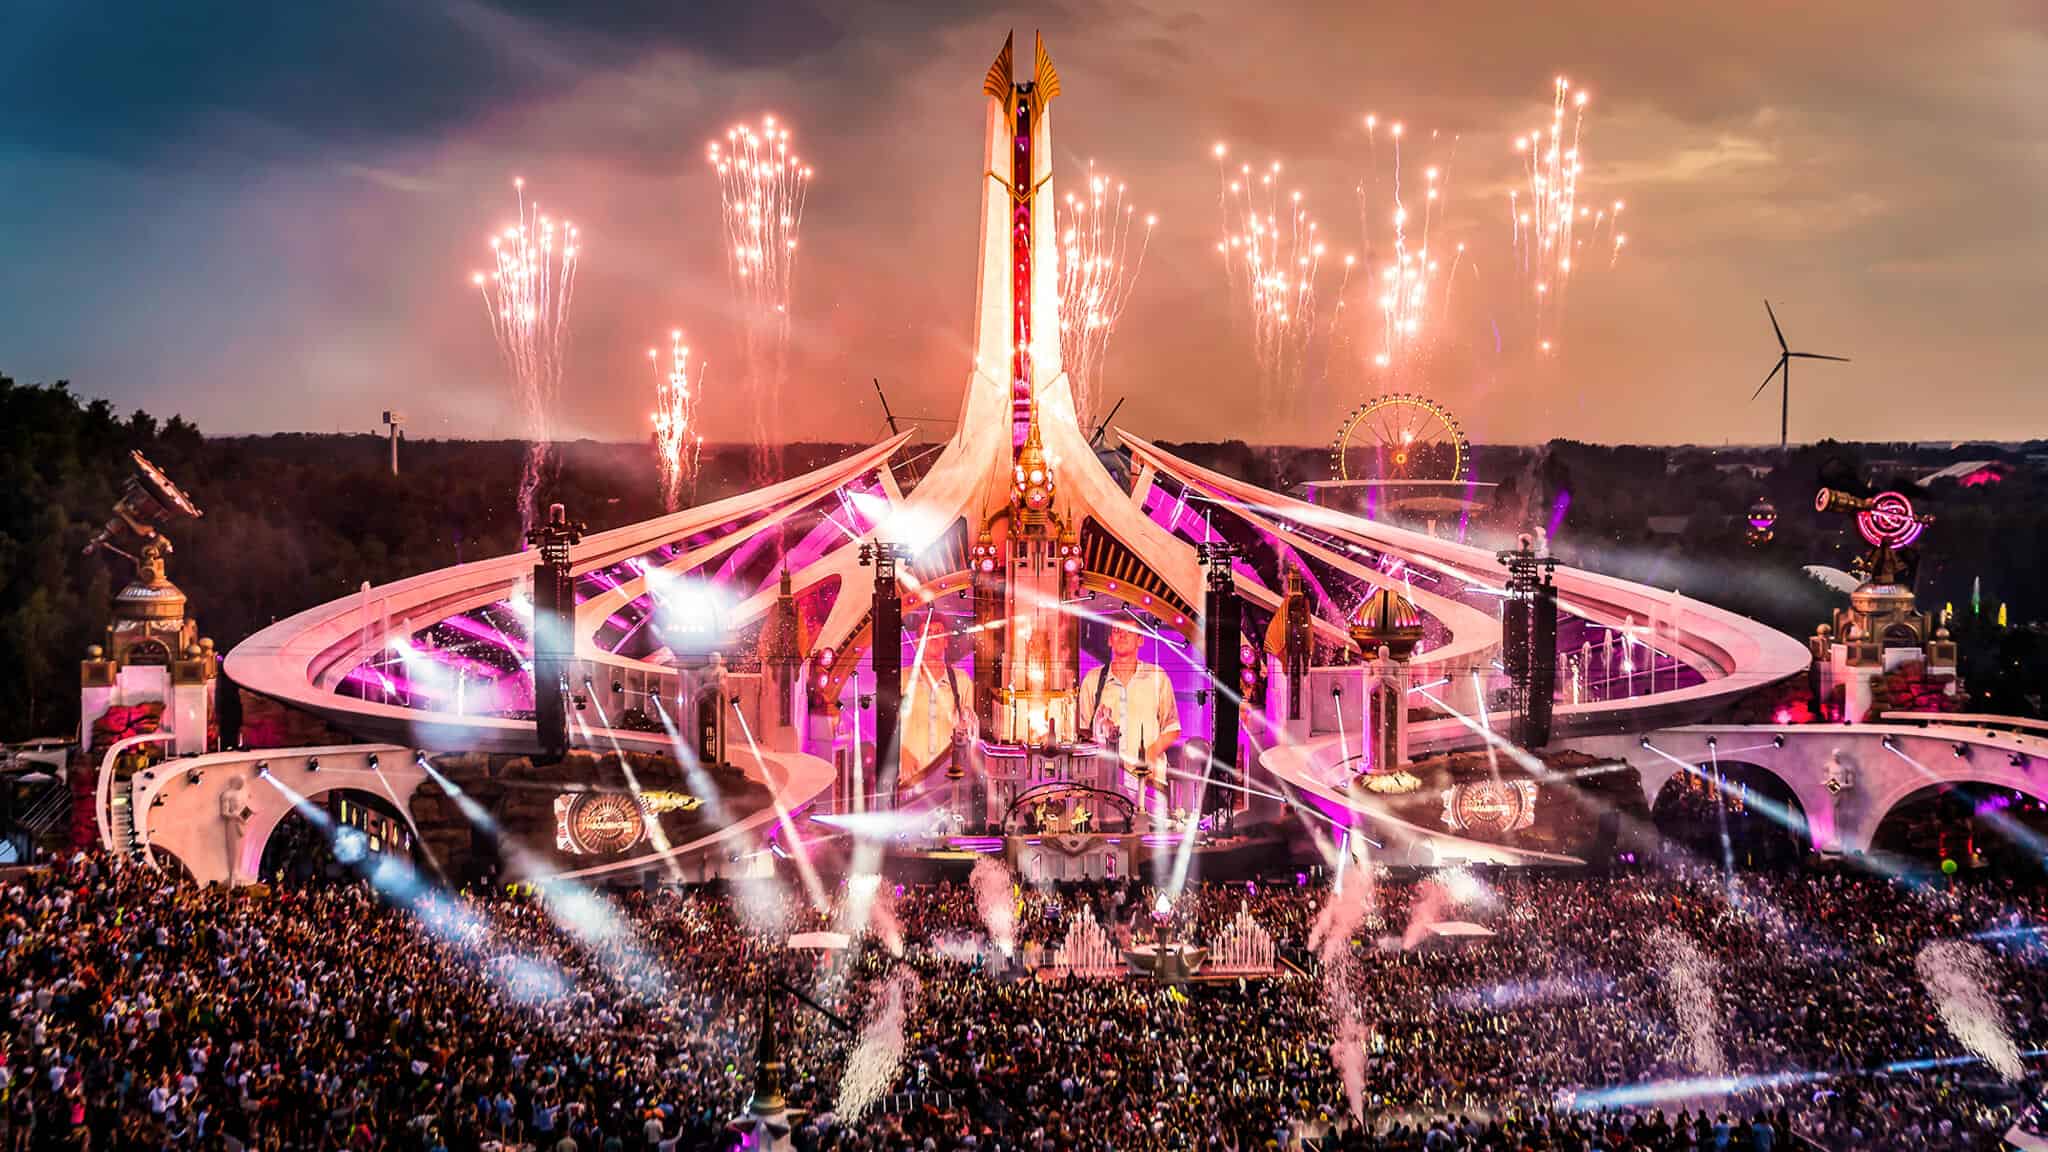 Tomorrowland: The remarkable evolution of the festival